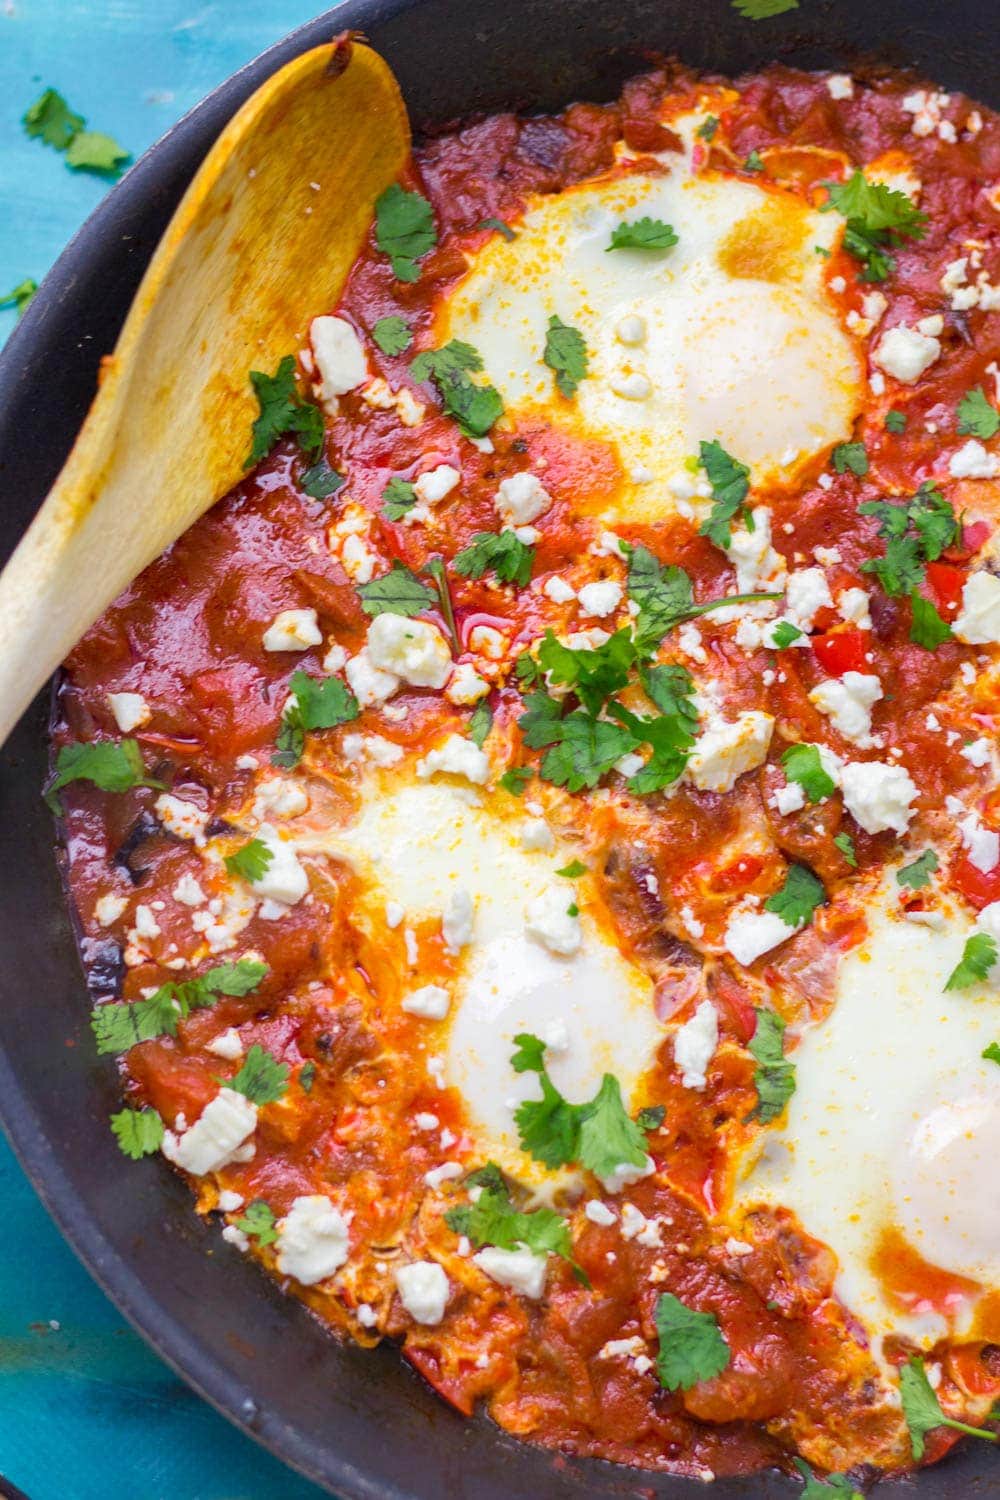 This chorizo shakshuka is full of smoky flavour from the chorizo and smoked paprika. Serve with crusty bread for those runny yolks and a dollop of yoghurt.